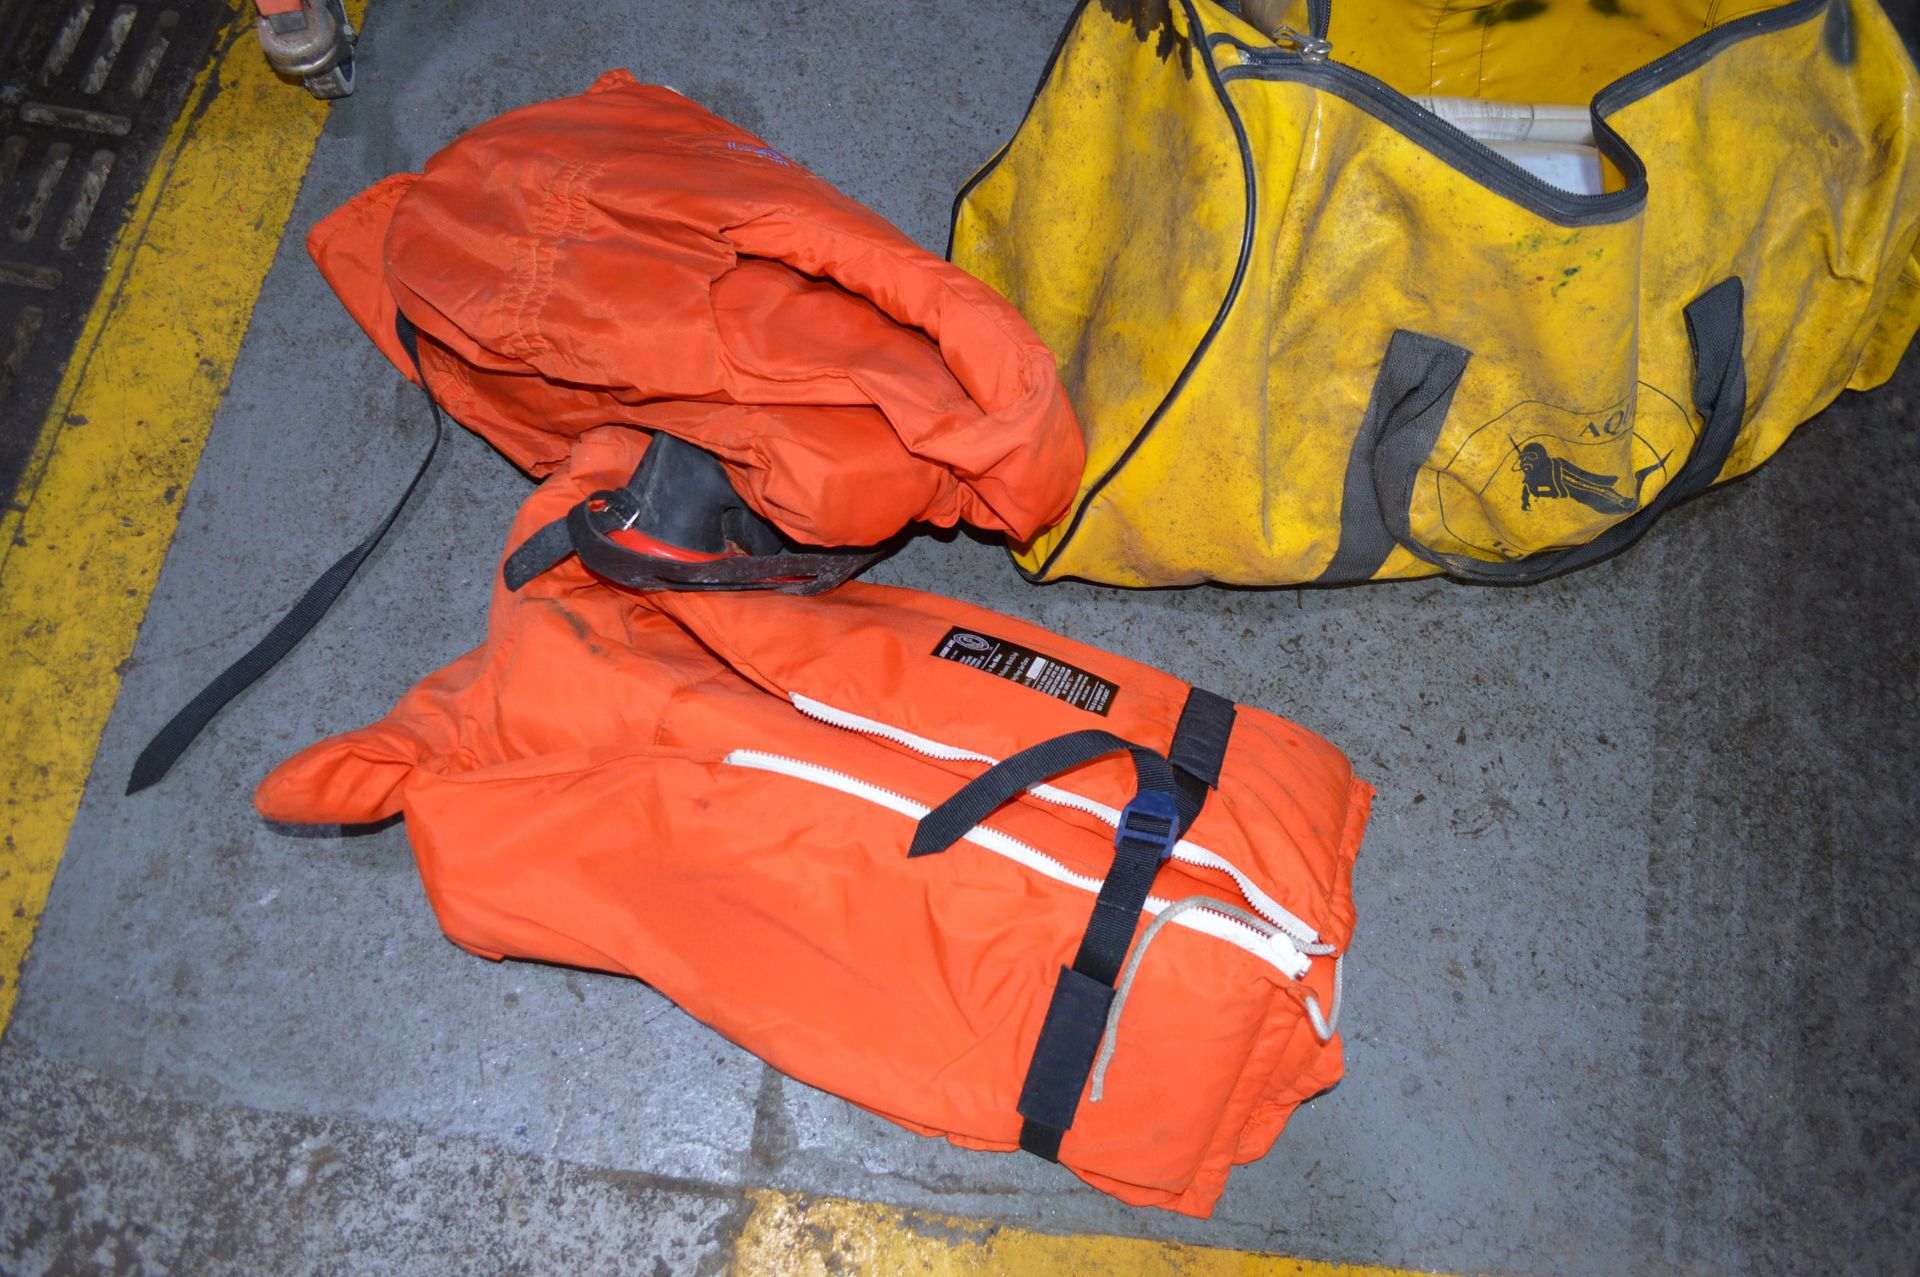 JOB LOT OF VARIOUS ITEMS, INCLUDING STOVE EQUIPMENT, BEE HIVE SMOKERS & LIFE JACKETS ETC. - Image 12 of 14